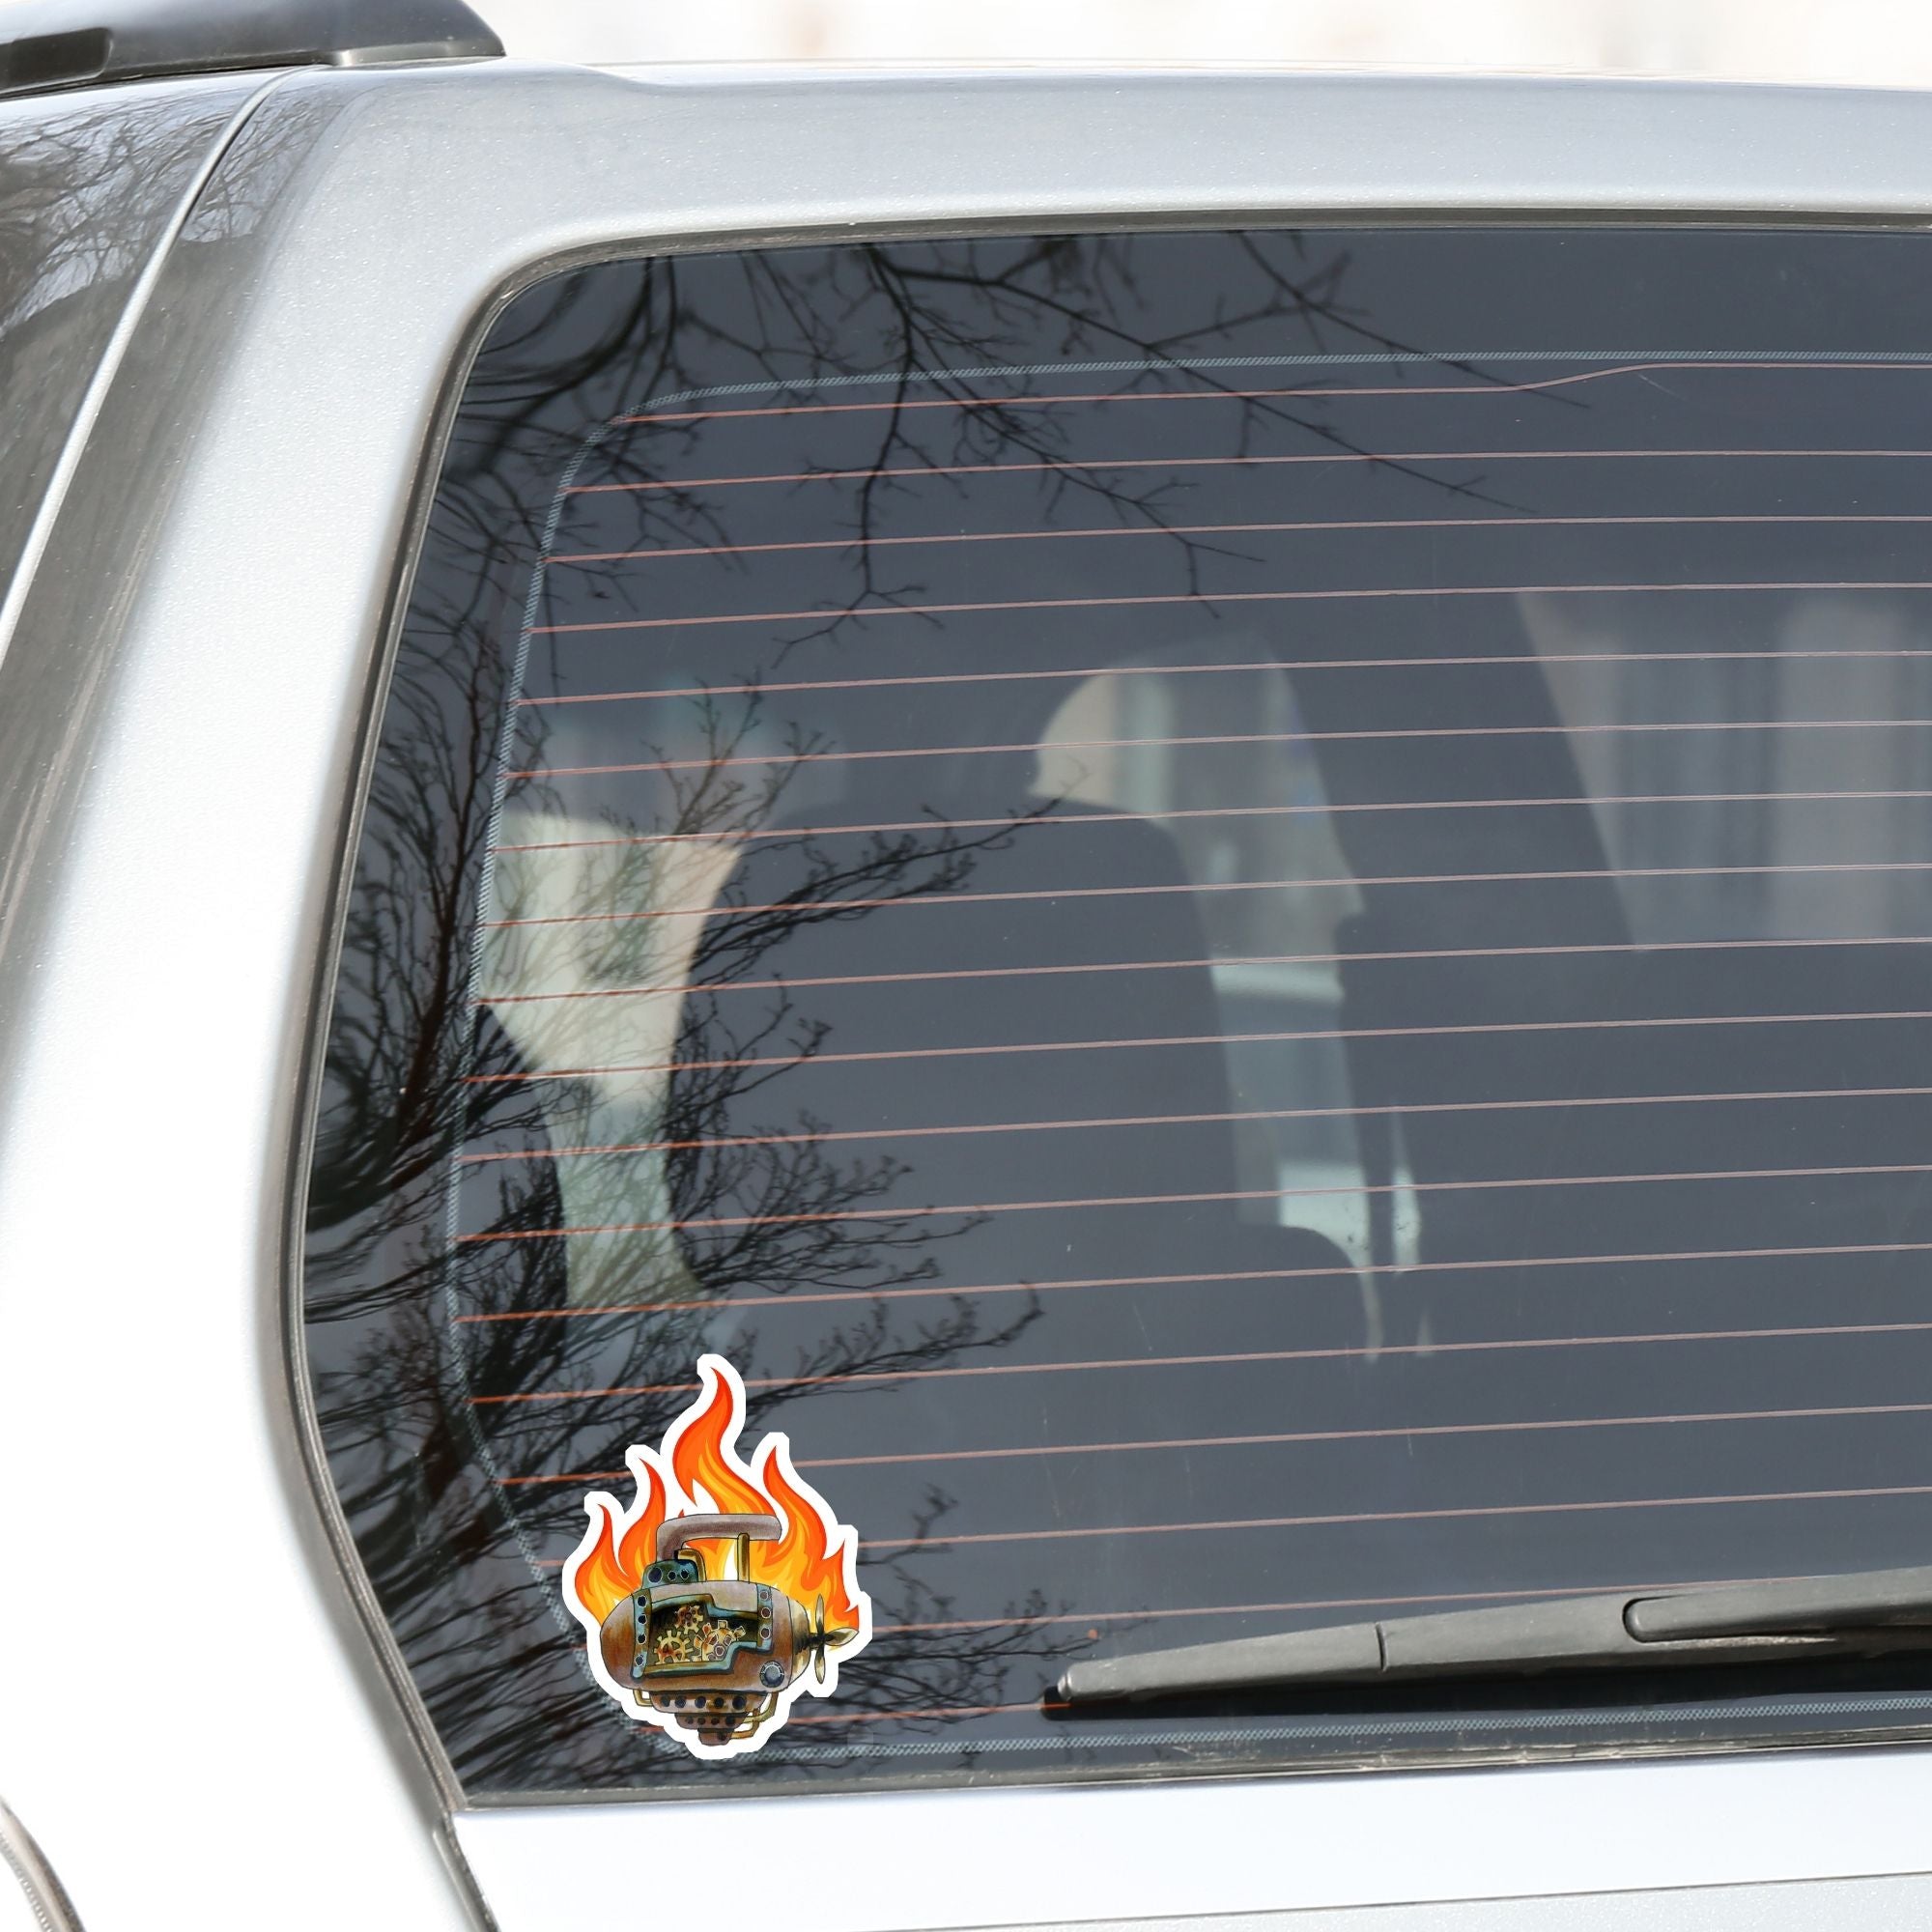 This individual die-cut steampunk sticker features a brown engine with a cutaway to show the gears inside, on a background of yellow, orange, and red flames. This image shows the steampunk engine sticker on the back window of a car.